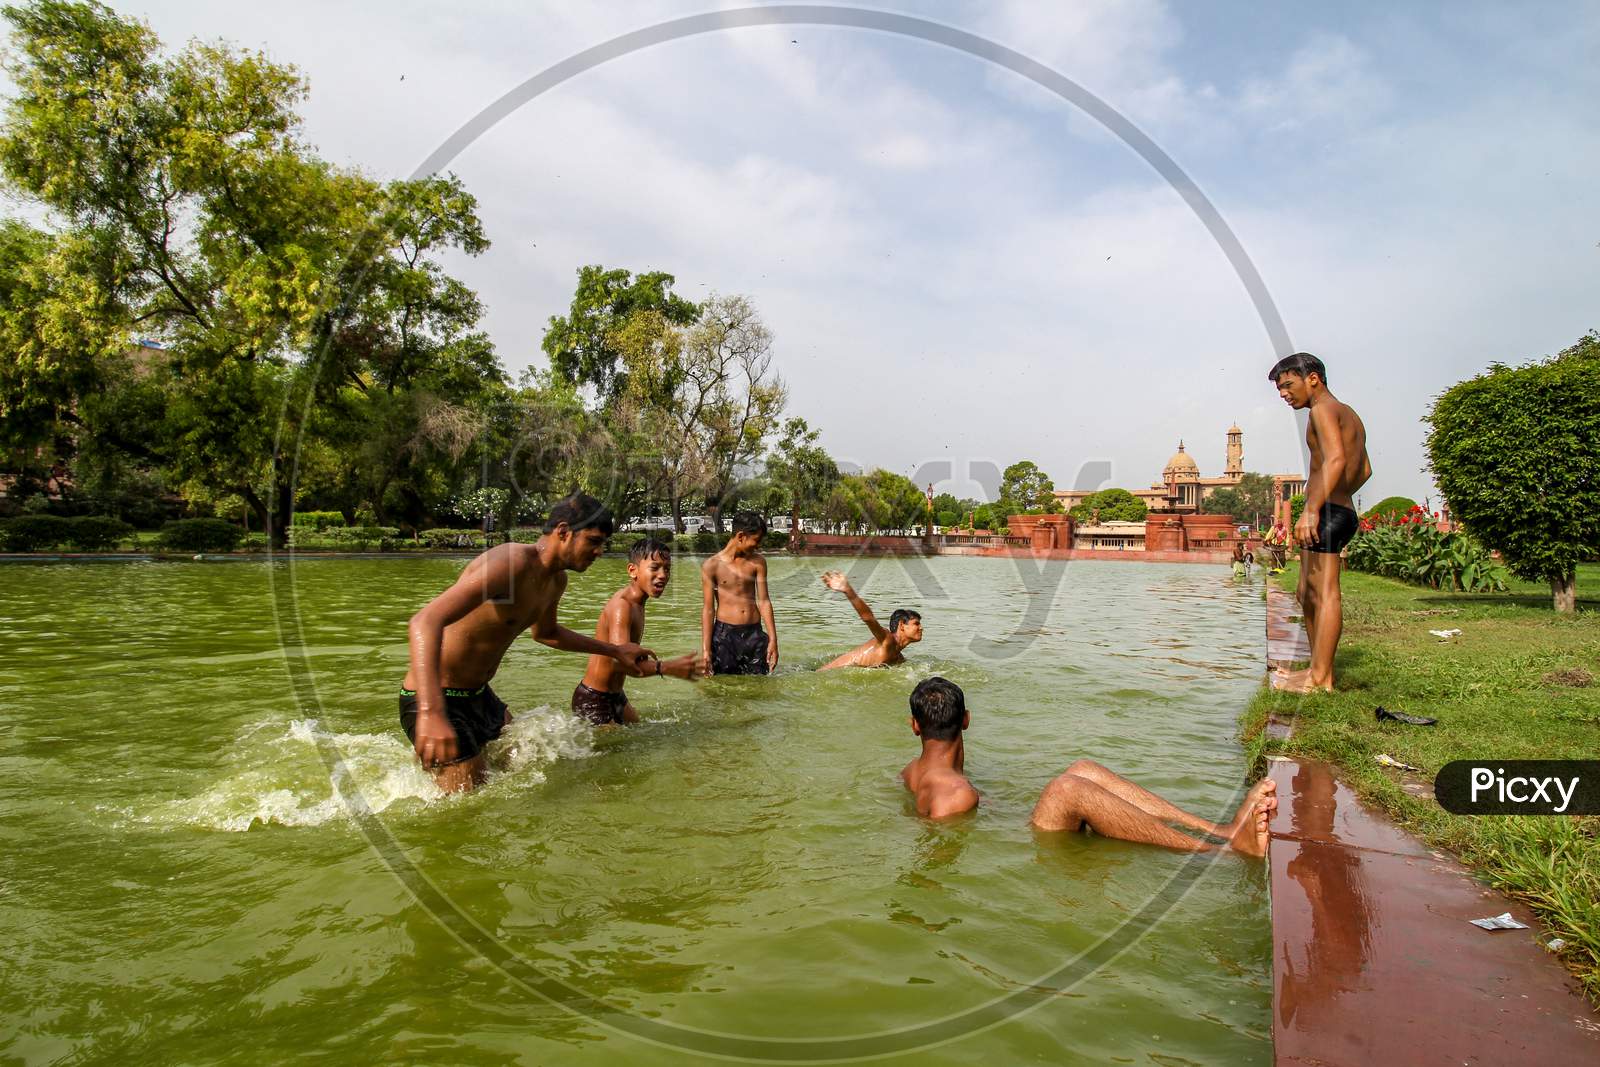 Delhi, New Delhi, India - May 26 2020: Happy Asian Kids Playing In A Lake Near India Gate In The Hot Summer. Cheerful And Carefree Children.